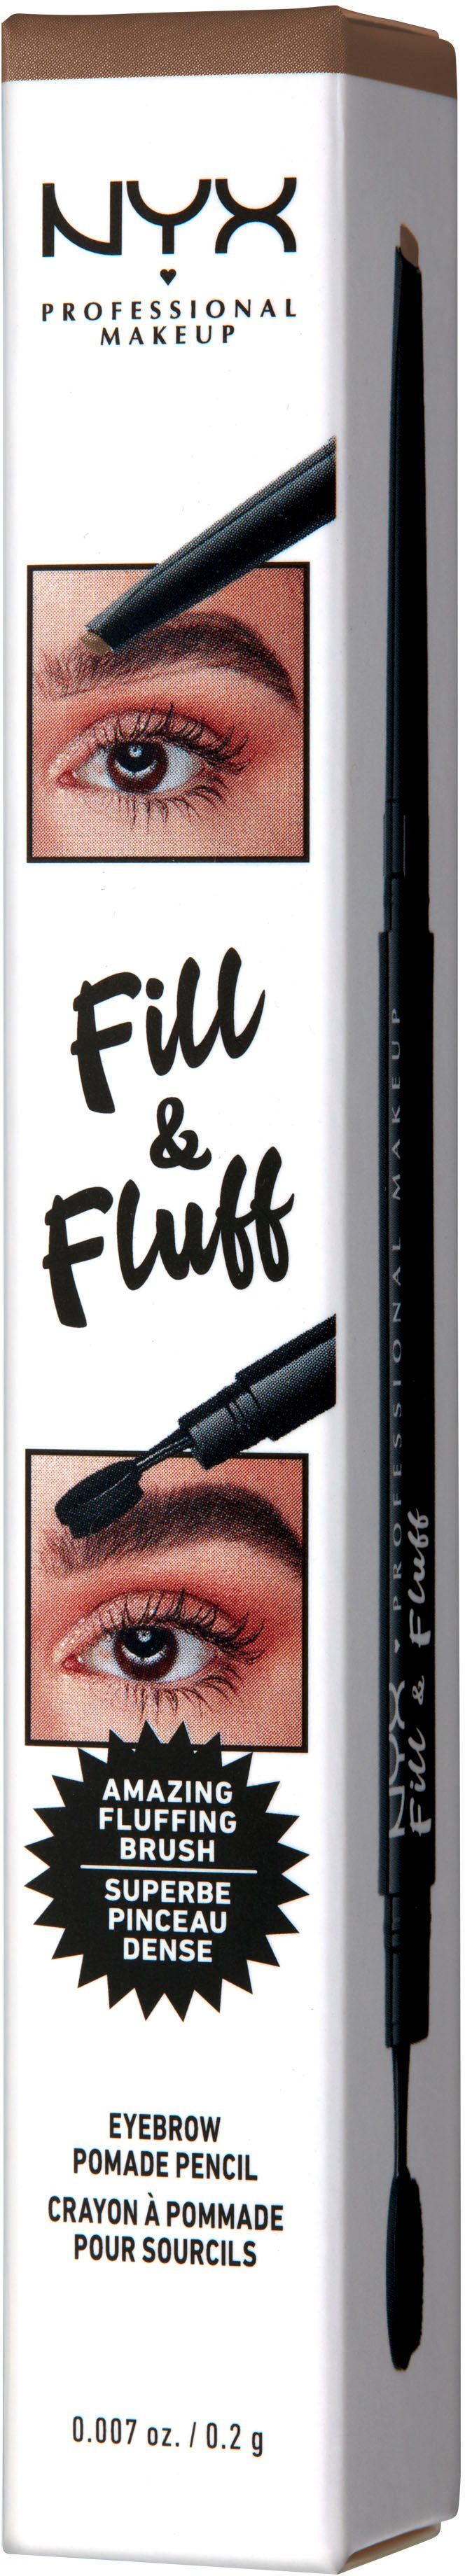 NYX Augenbrauen-Stift Fluff Eyebrow Professional Makeup Pencil & taupe Pomade Fill